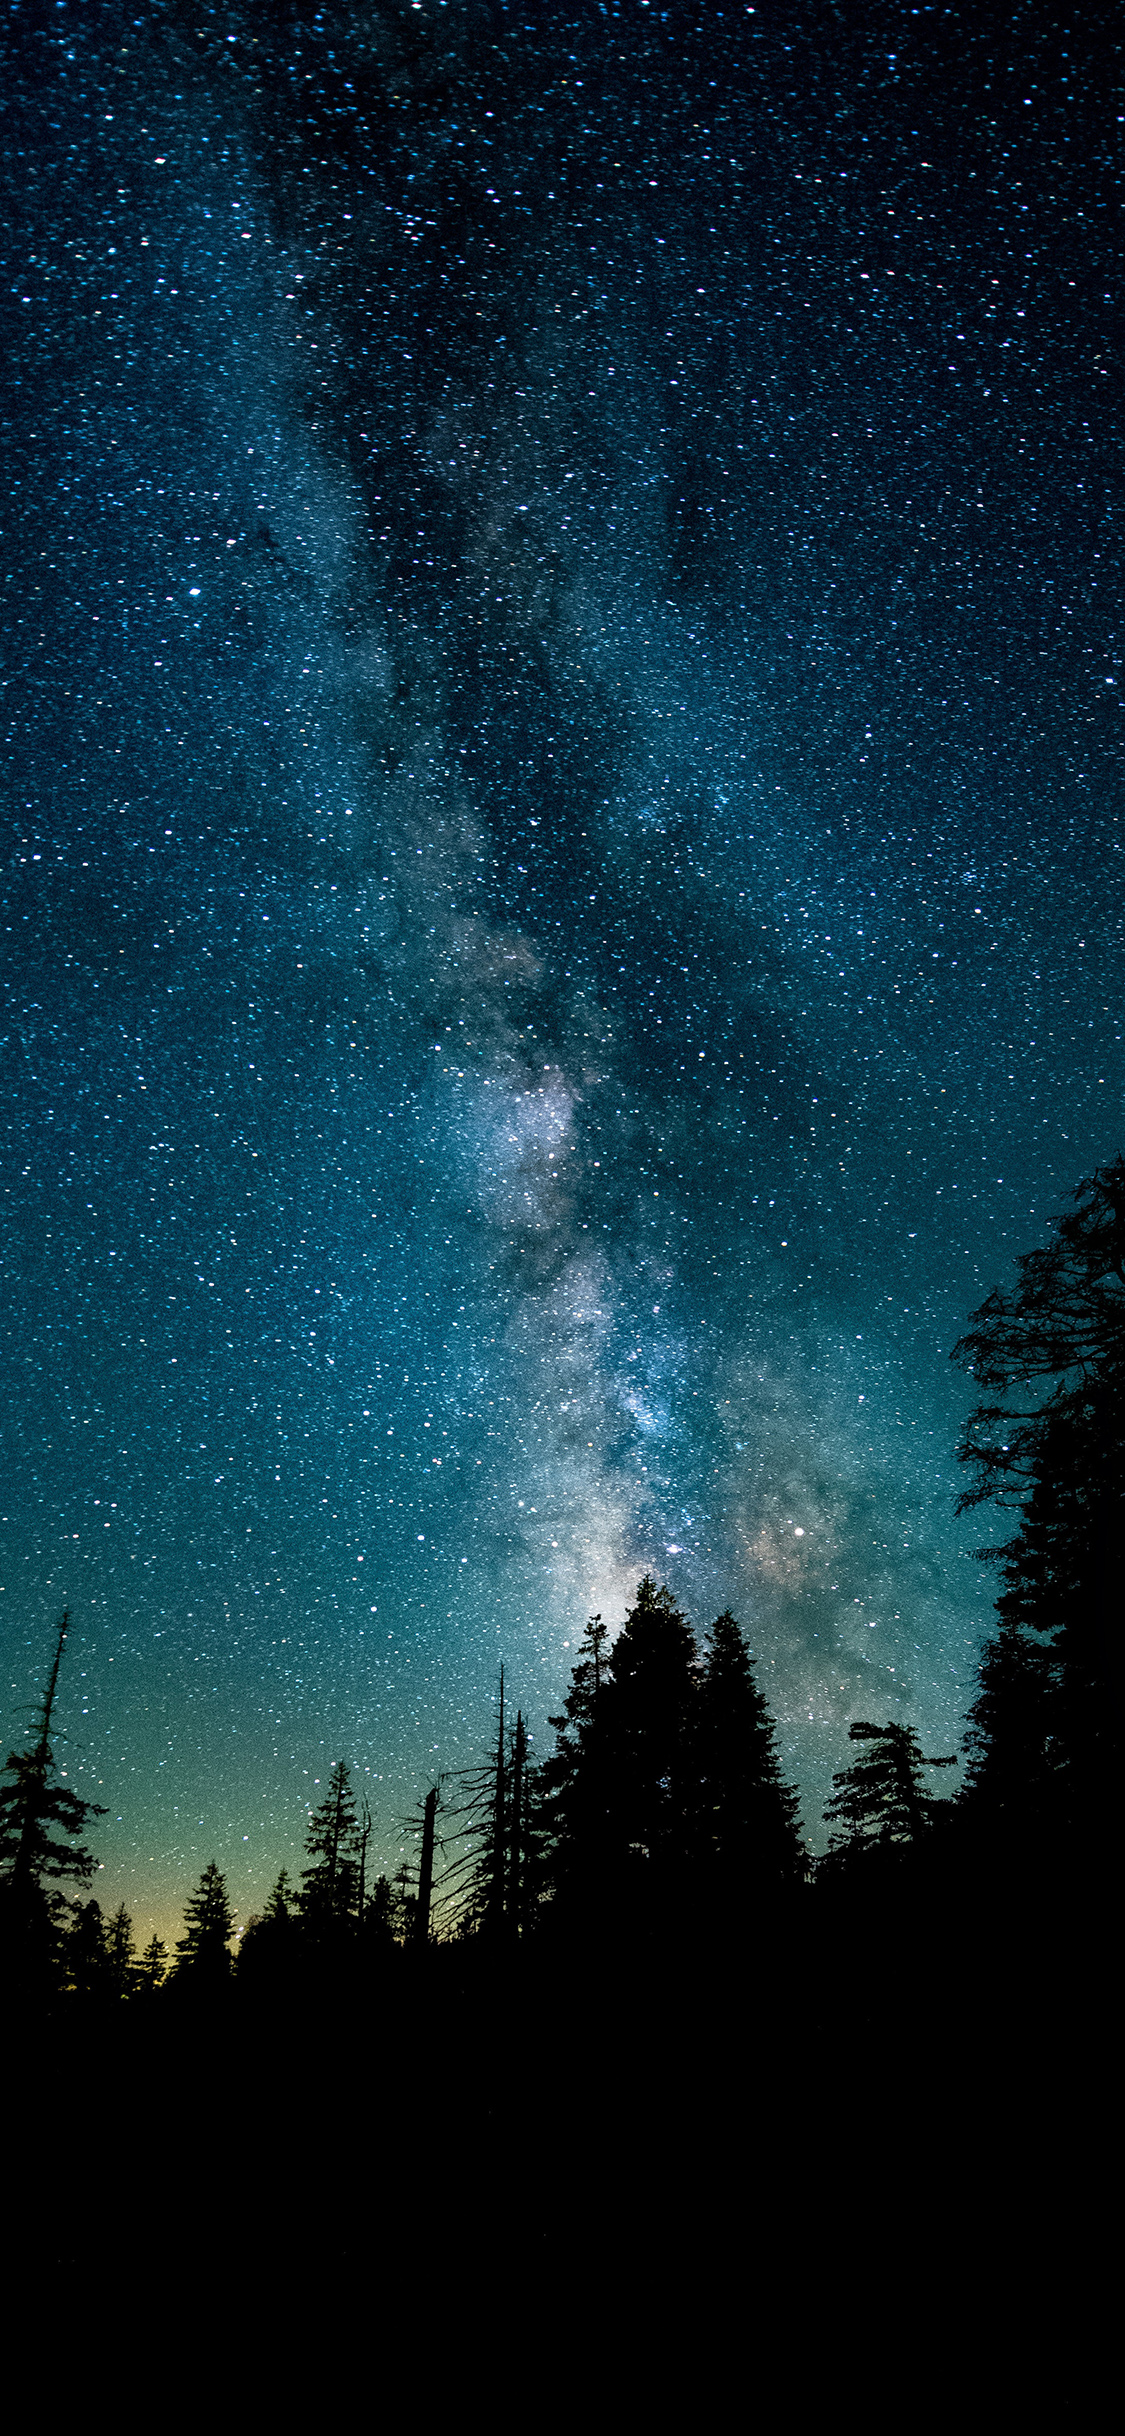 iPhone X wallpaper. night sky star space nature